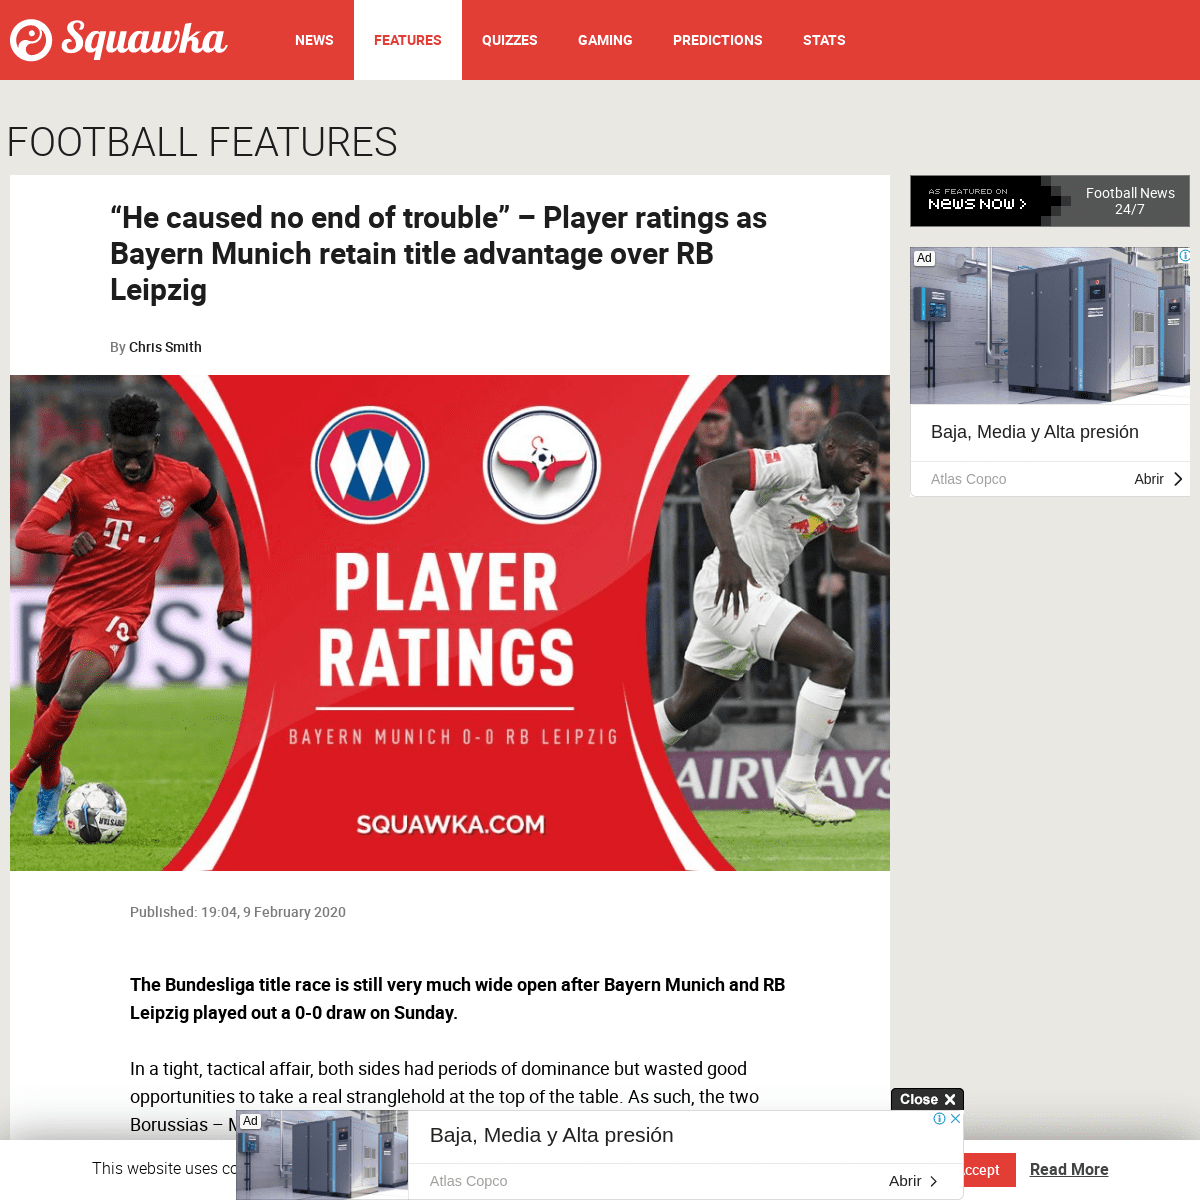 A complete backup of www.squawka.com/en/features/bayern-munich-rb-leipzig-player-ratings-bundesliga